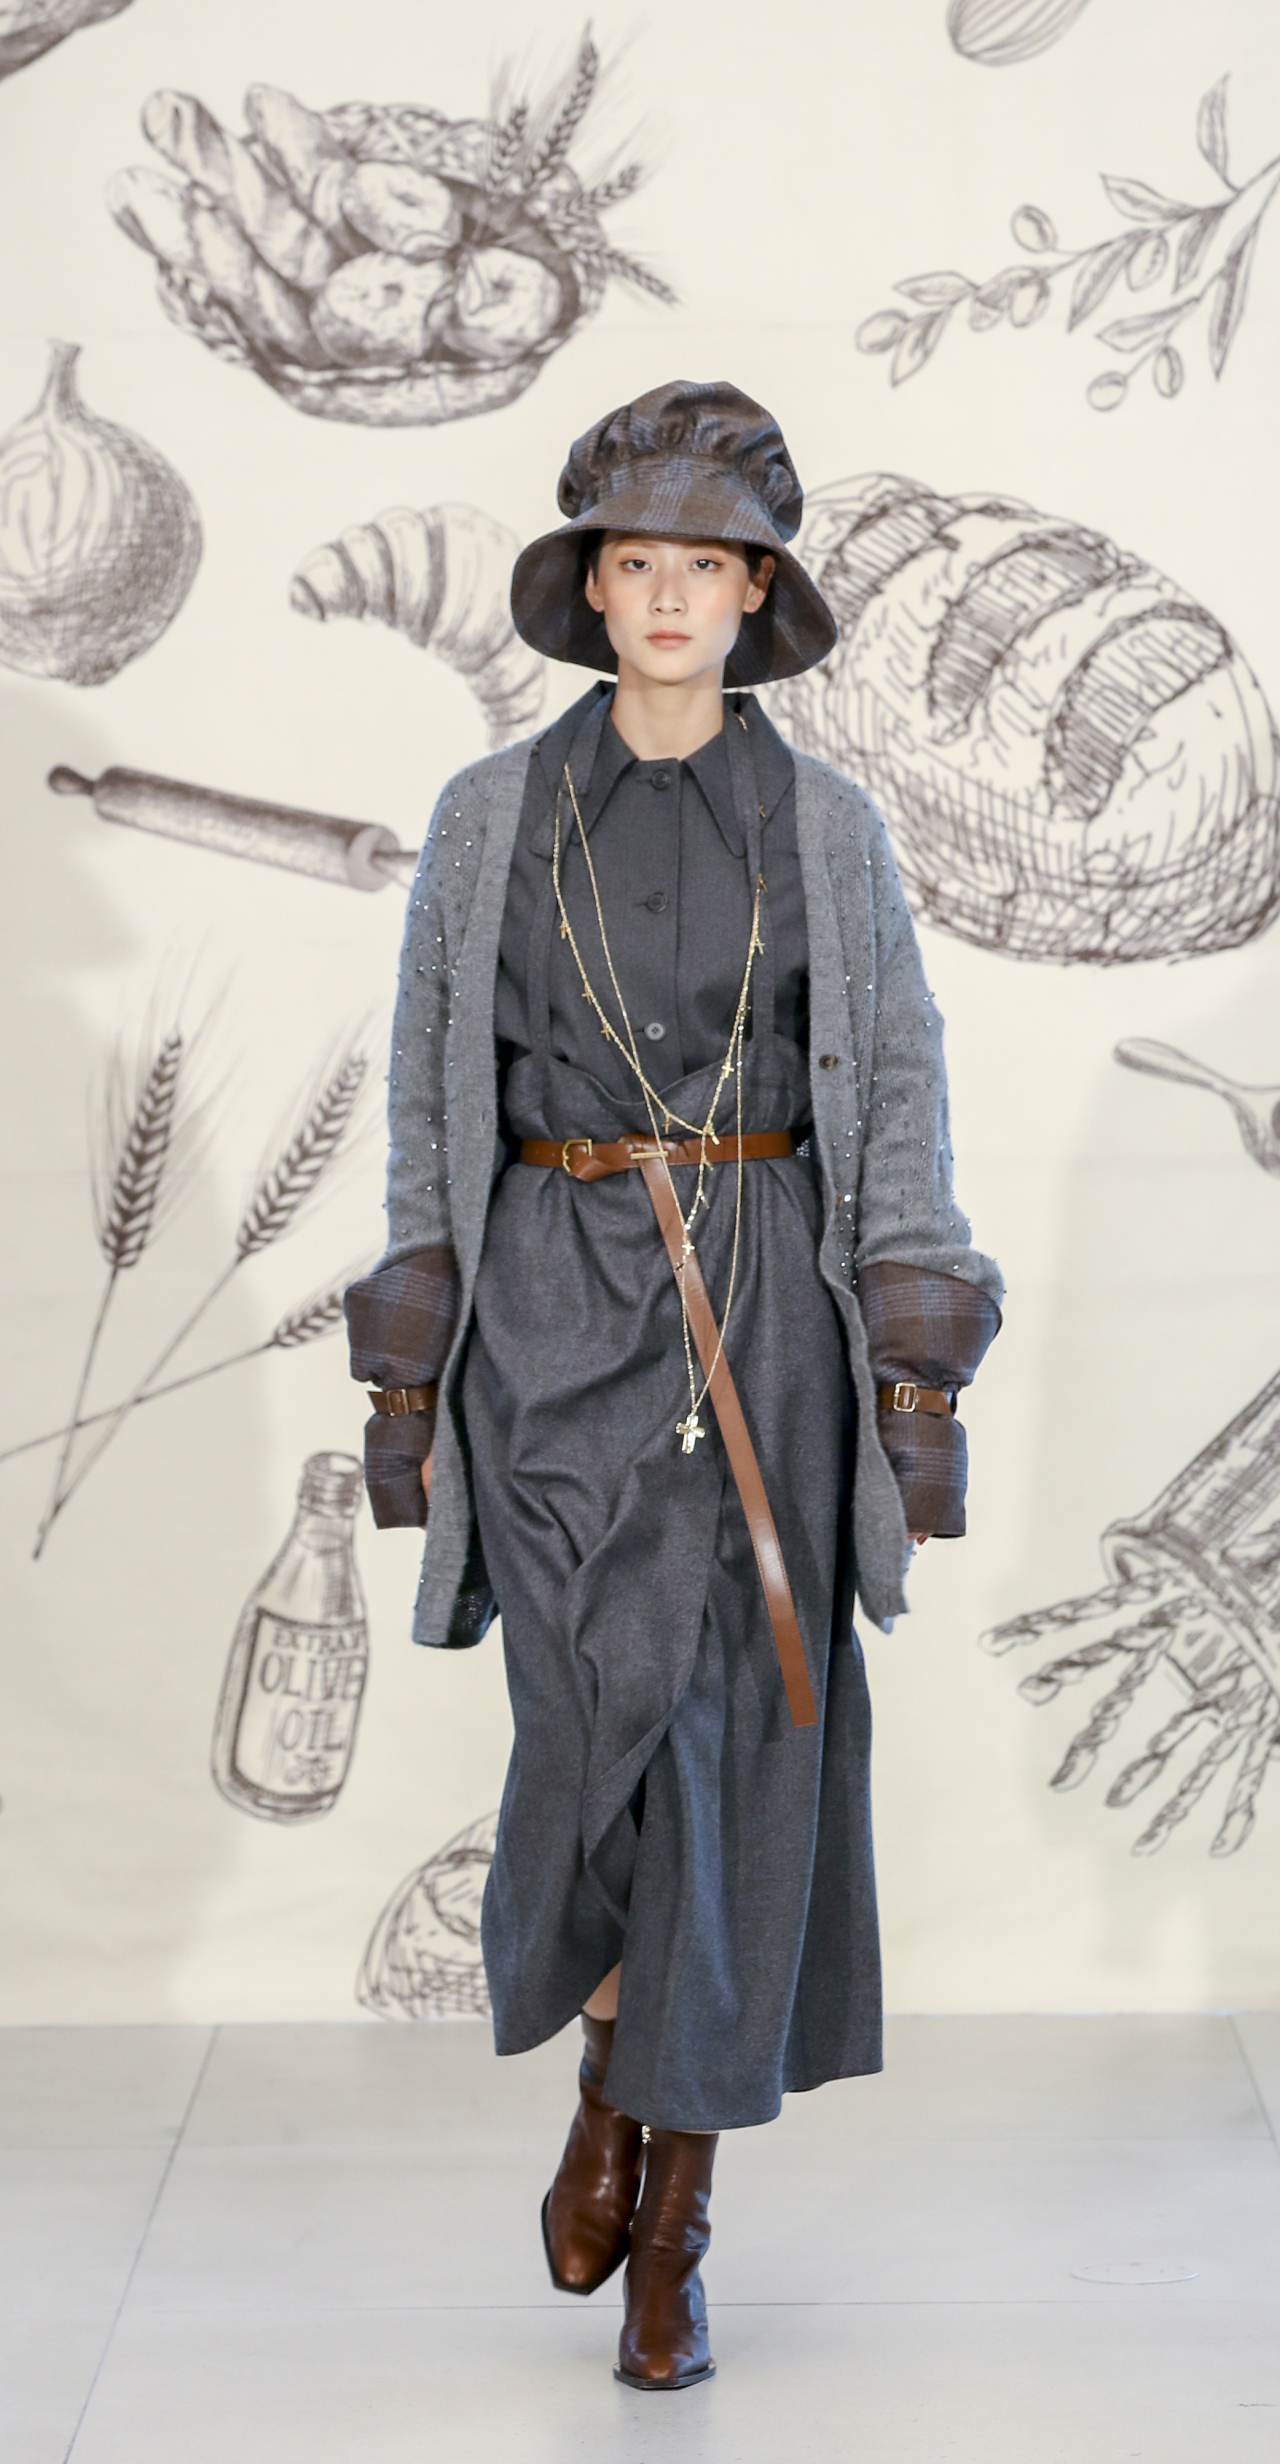 Fashion Designer Gee Chun-hee showcases her 2021 F/W fashion collection inspired by slow fashion. (Miss Gee Collection)